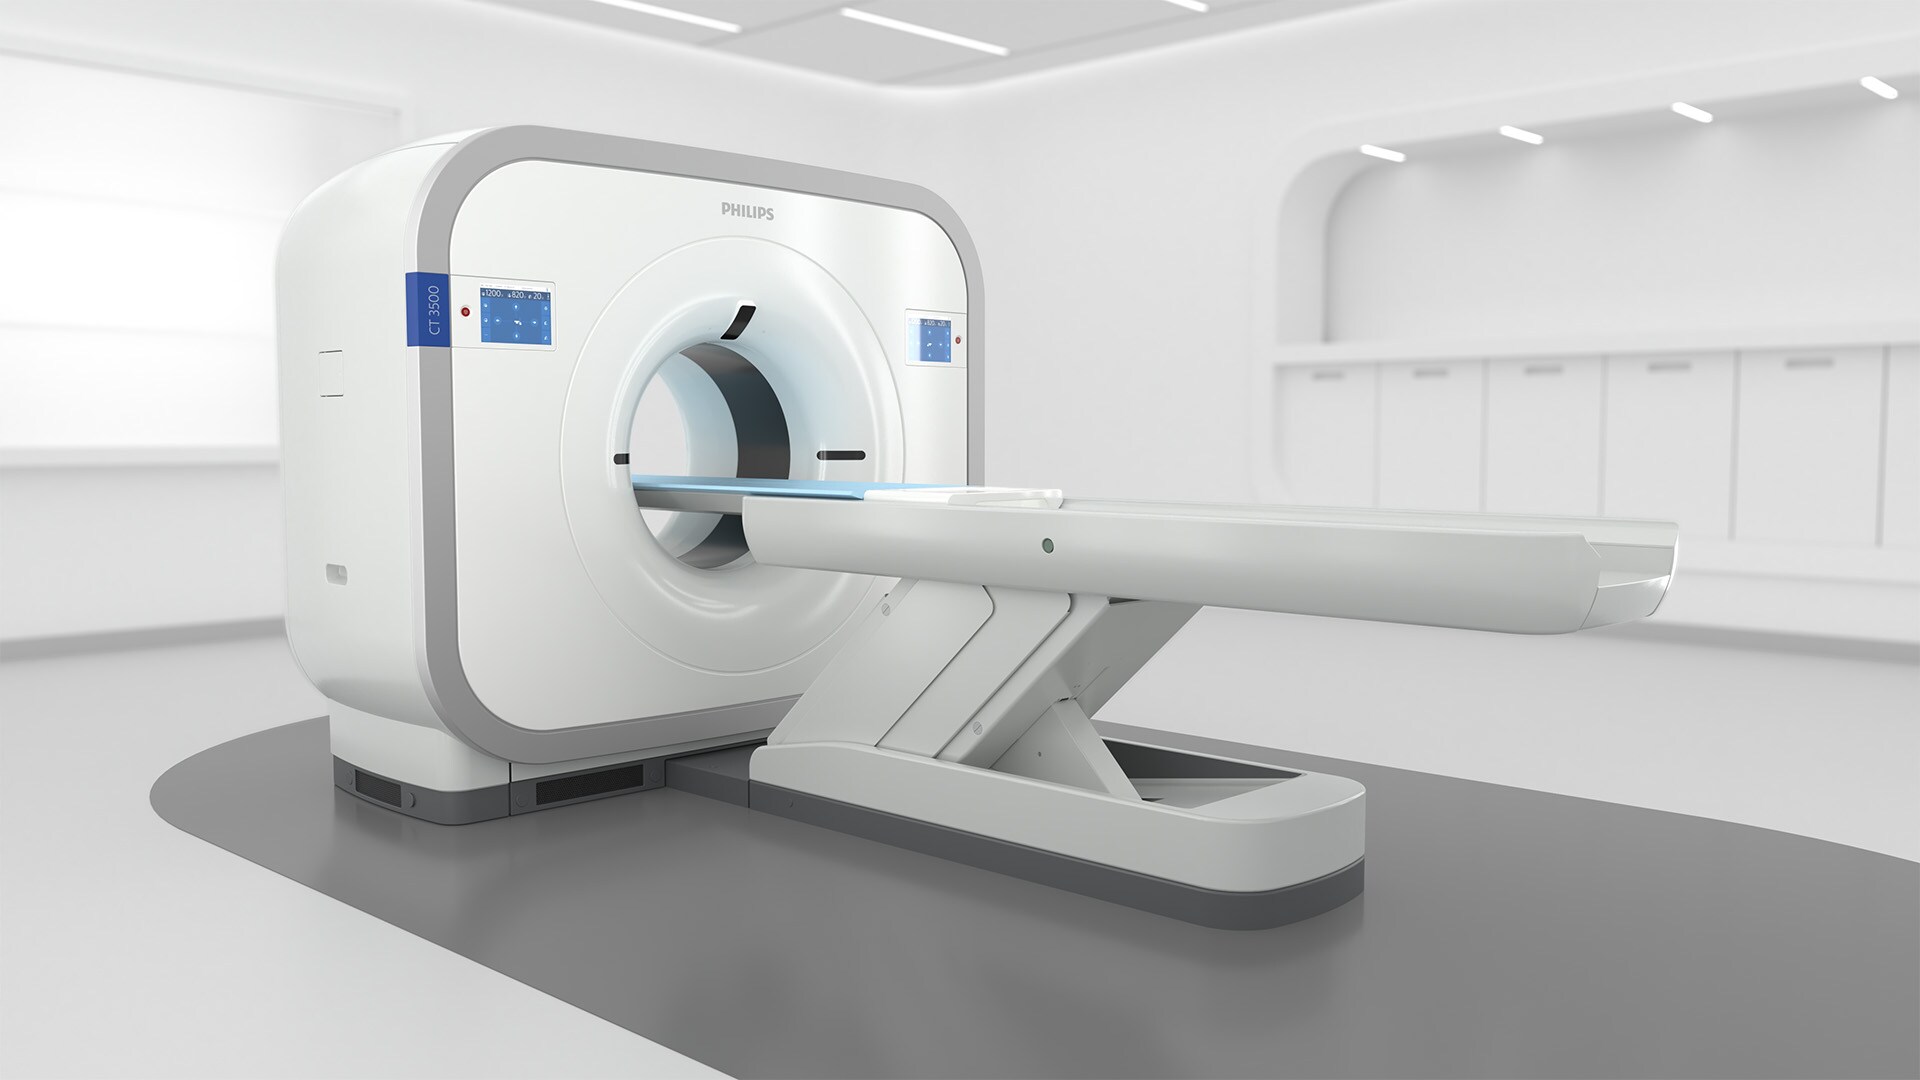 Philips launches AI-powered CT system to accelerate routine radiology and high-volume screening programs